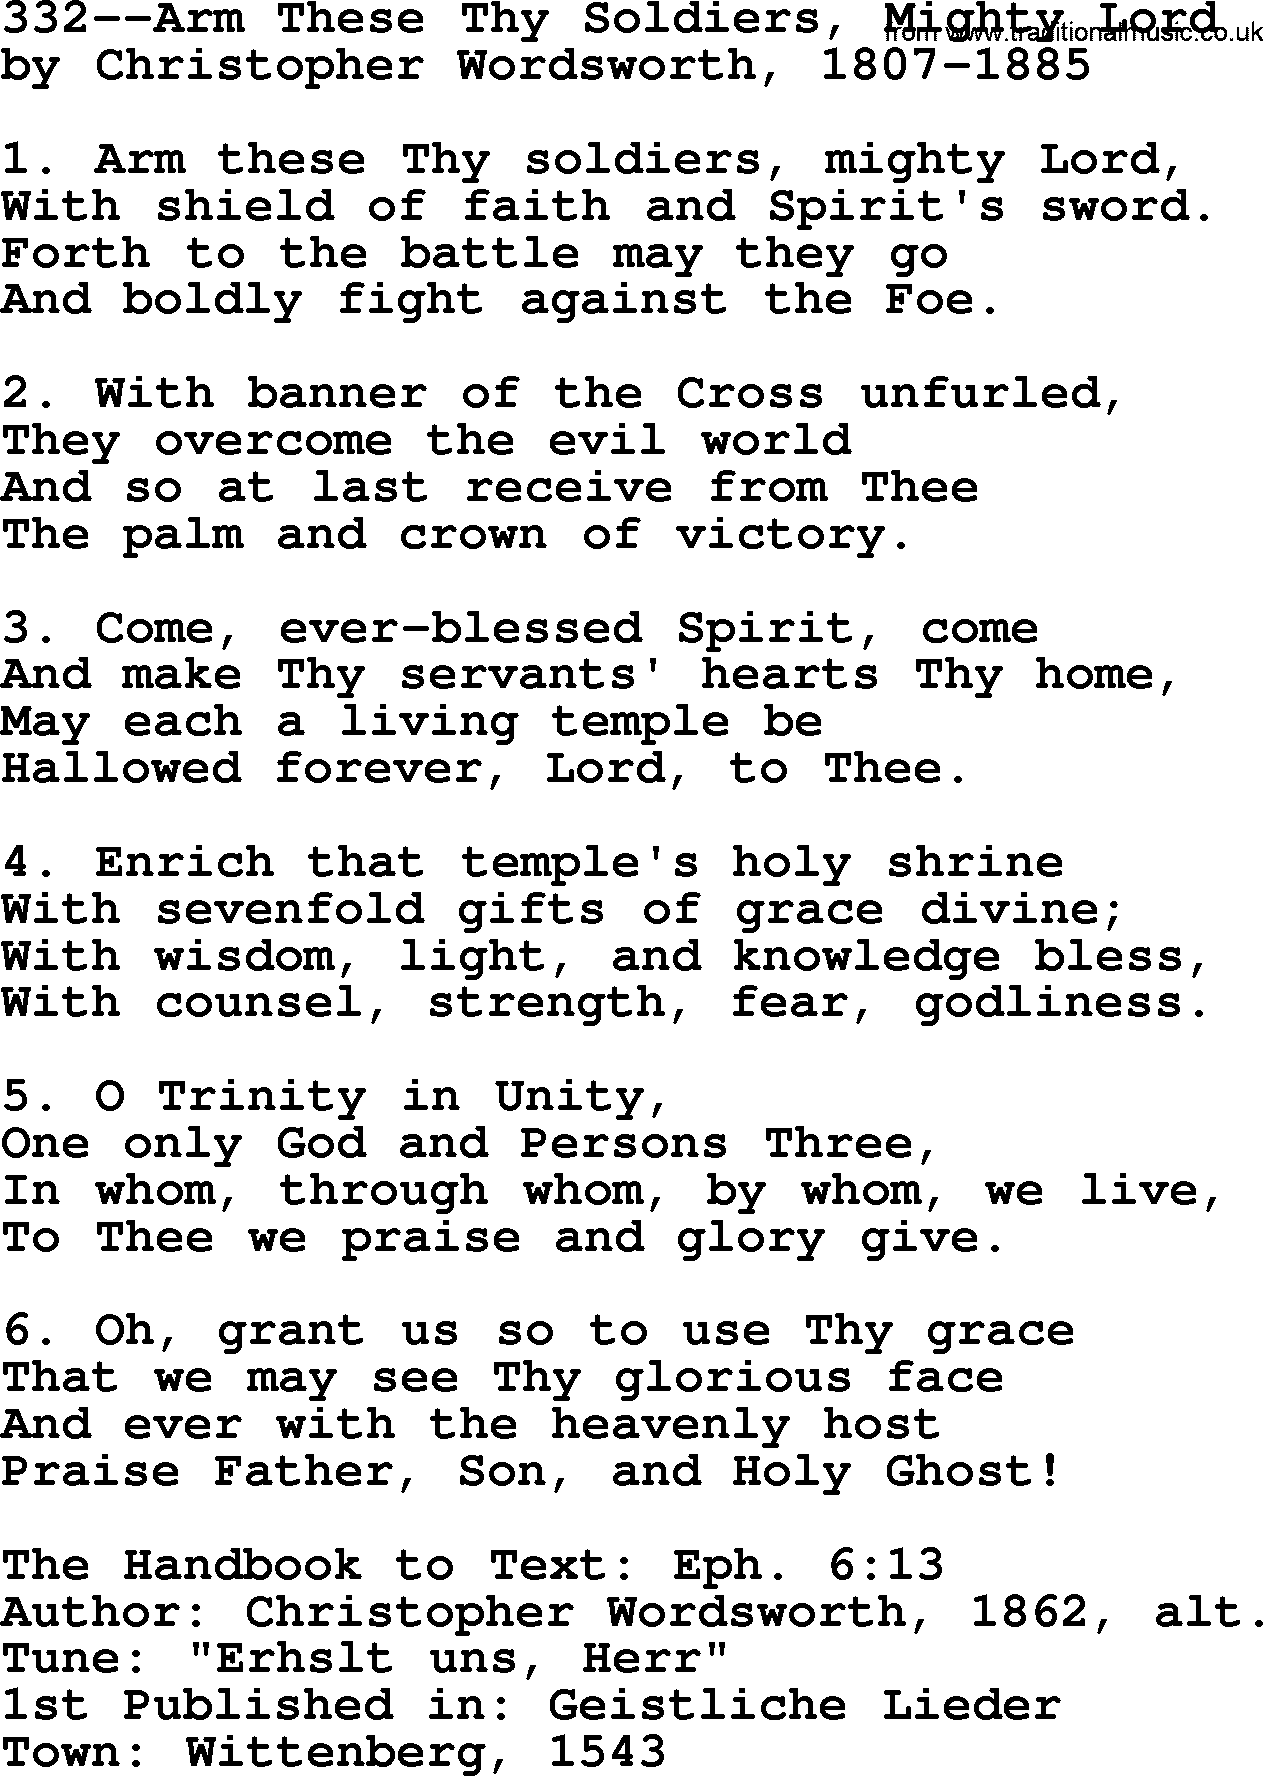 Lutheran Hymn: 332--Arm These Thy Soldiers, Mighty Lord.txt lyrics with PDF